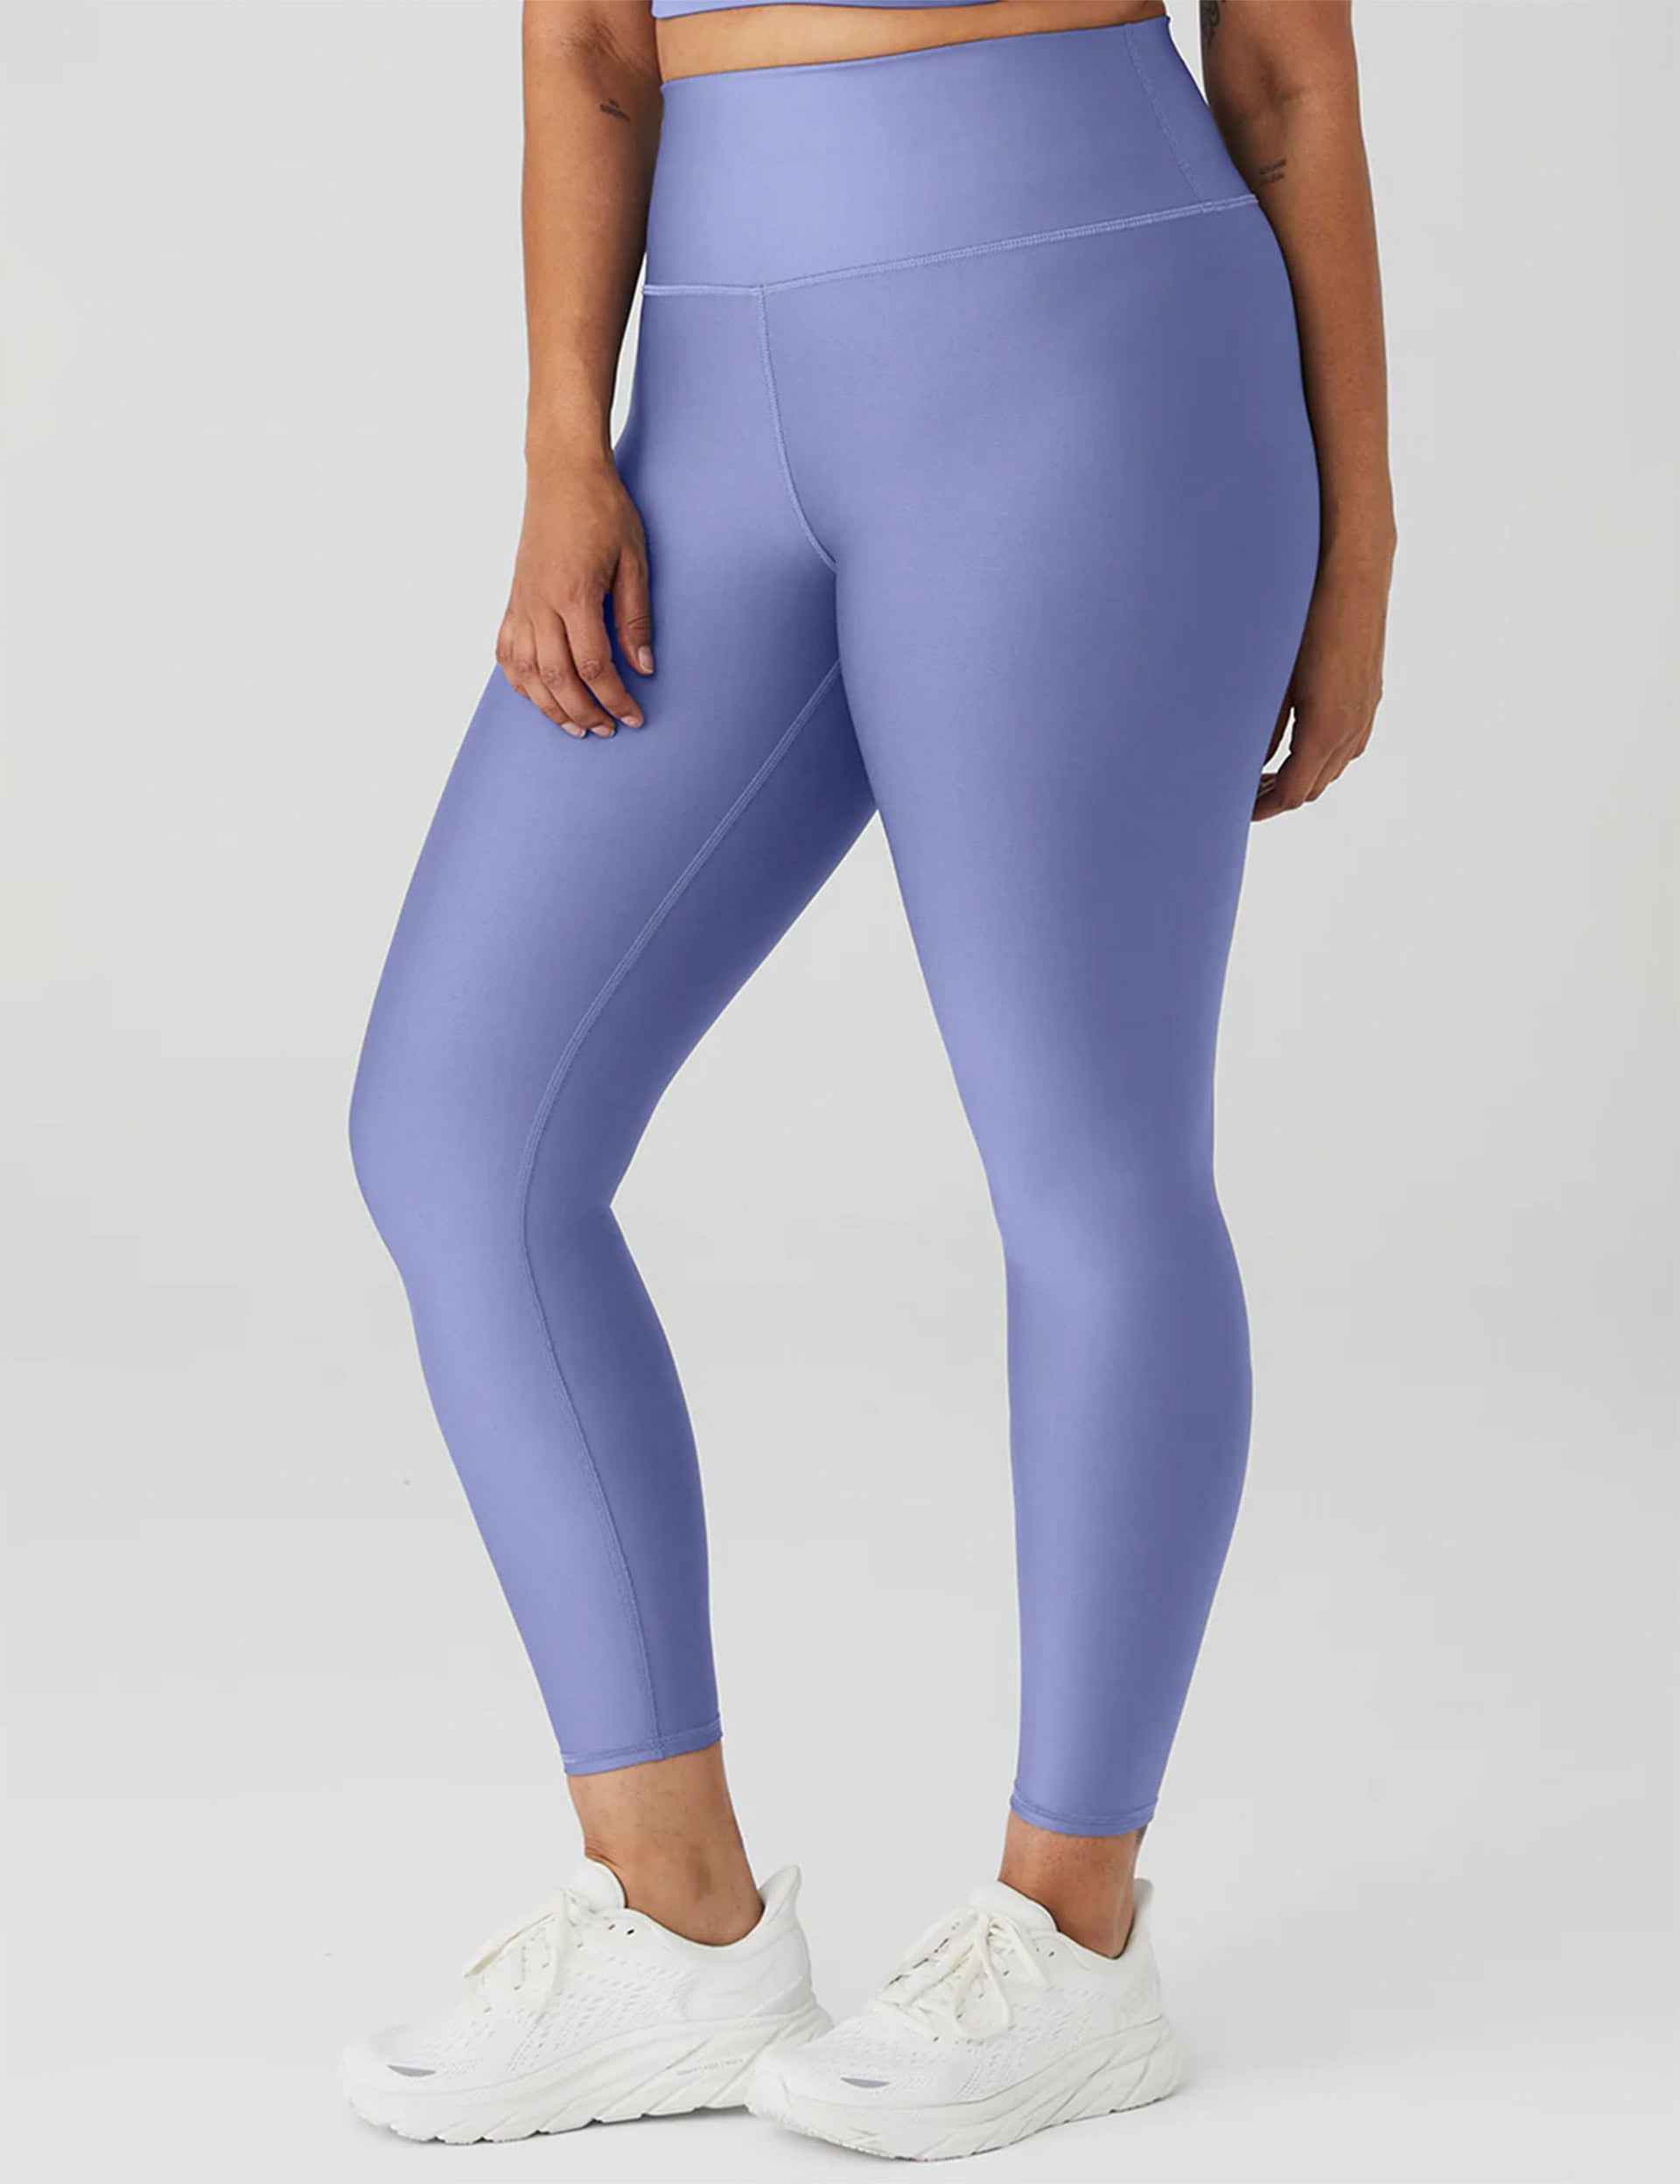 7/8 High-Waist Checkpoint Legging in Blue Skies by Alo Yoga